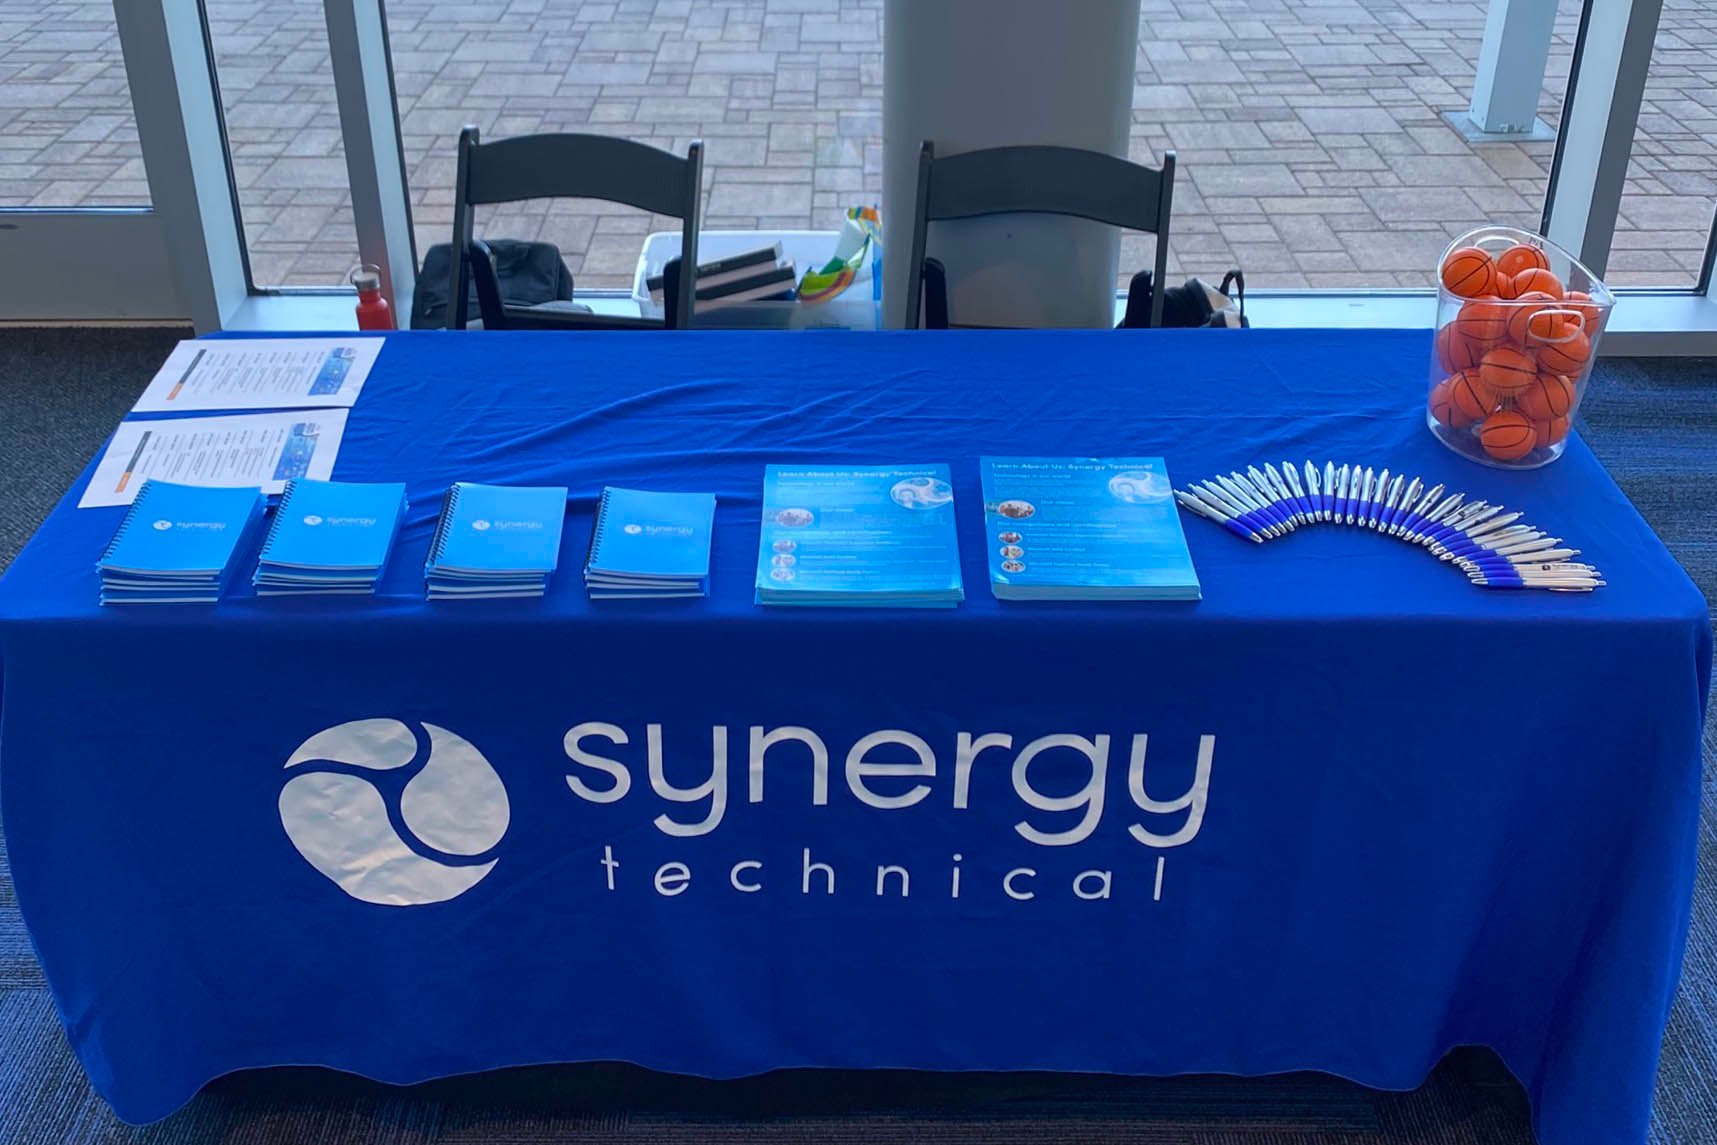 Picture of Synergy Technical booth at GiSTEM event with brochures and swag